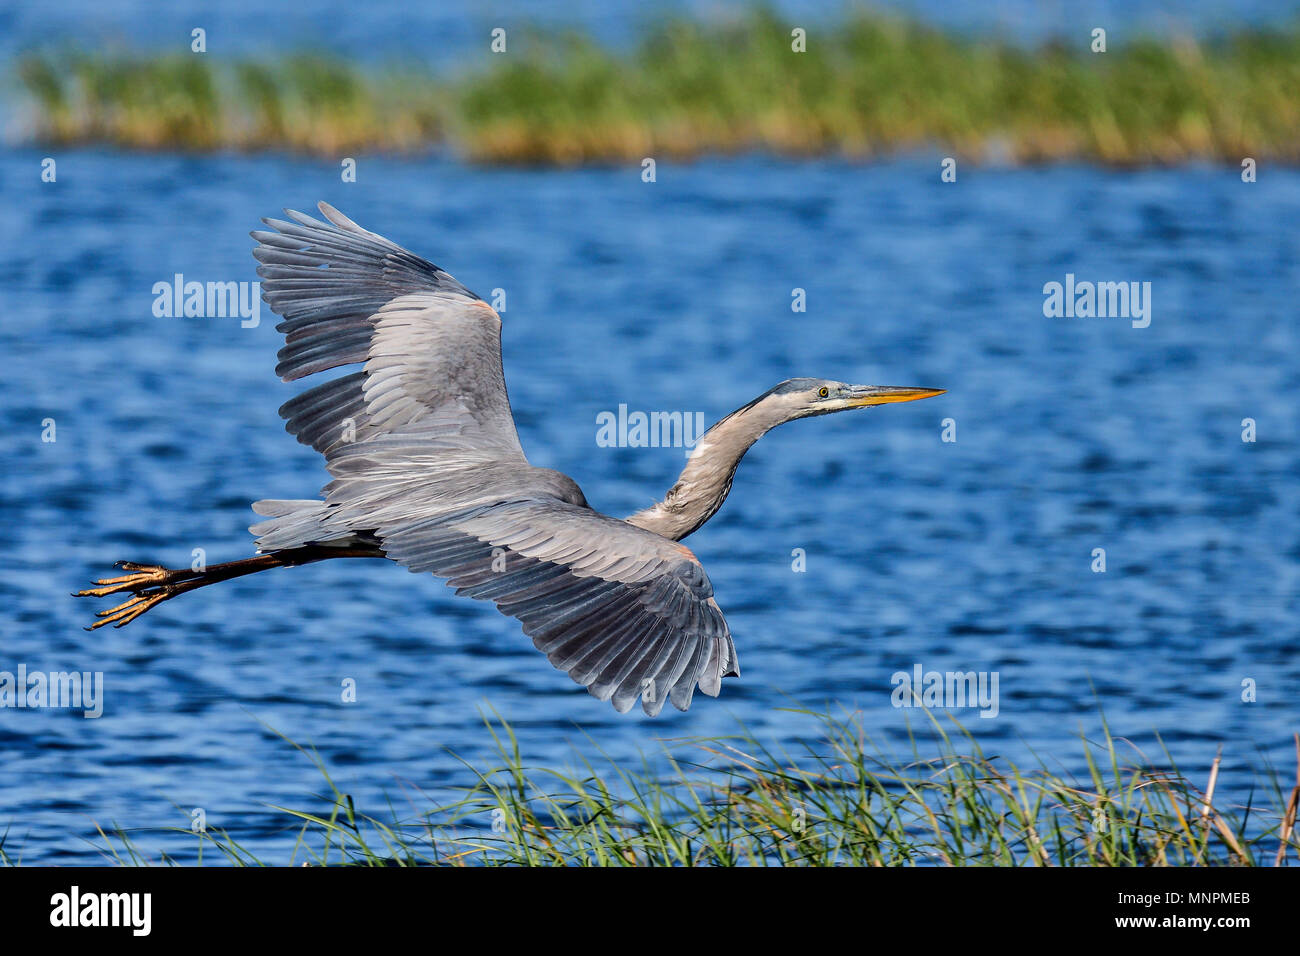 Great Blue Heron gliding over water. Stock Photo